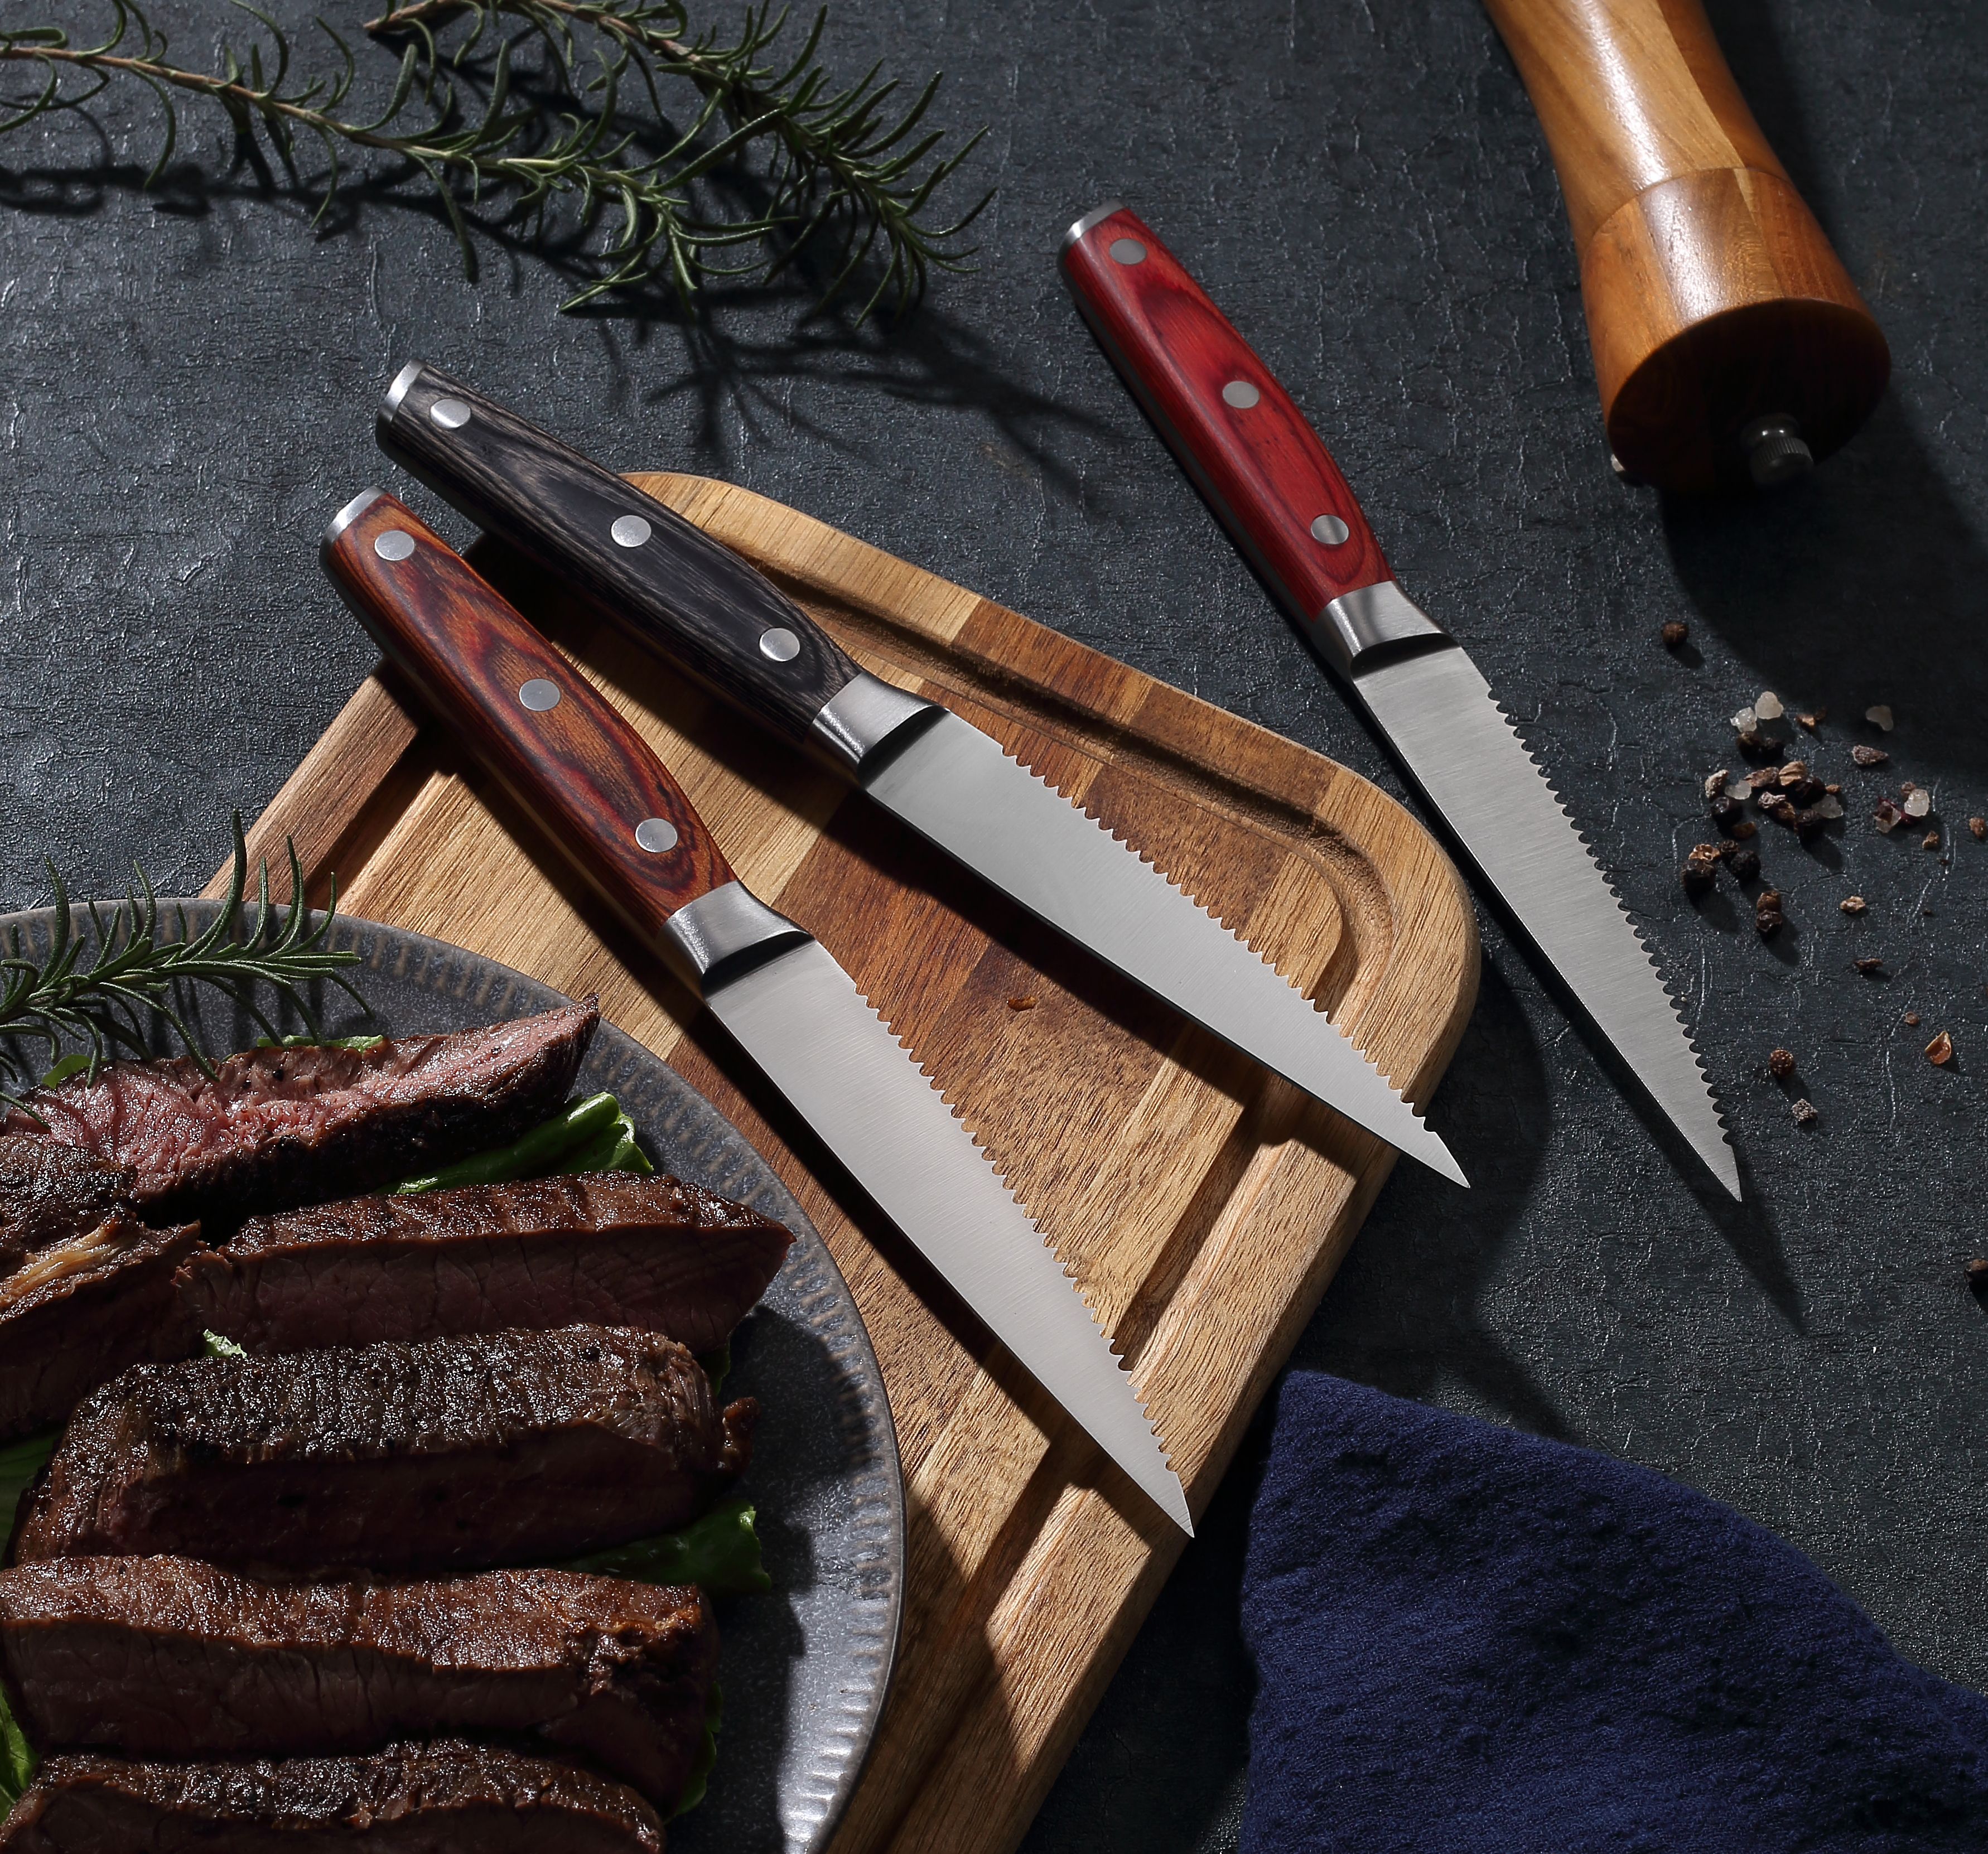 Wooden Handled Steak Knives - Serrated for Precise Cuts, Effortless Cleaning